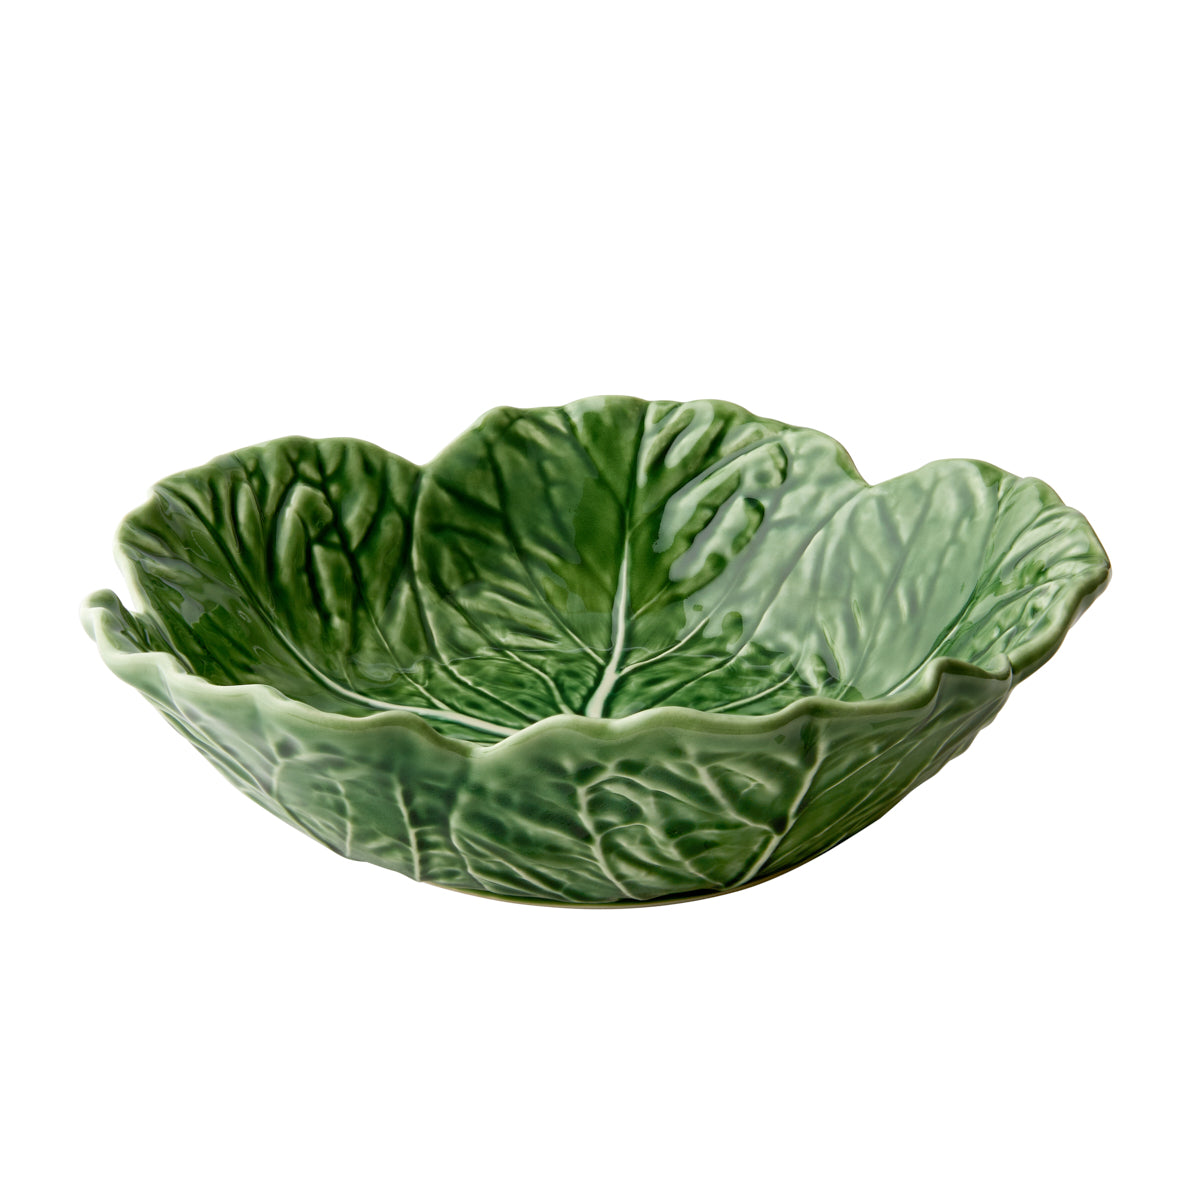 Cabbage Bowl - Large Green 29cm